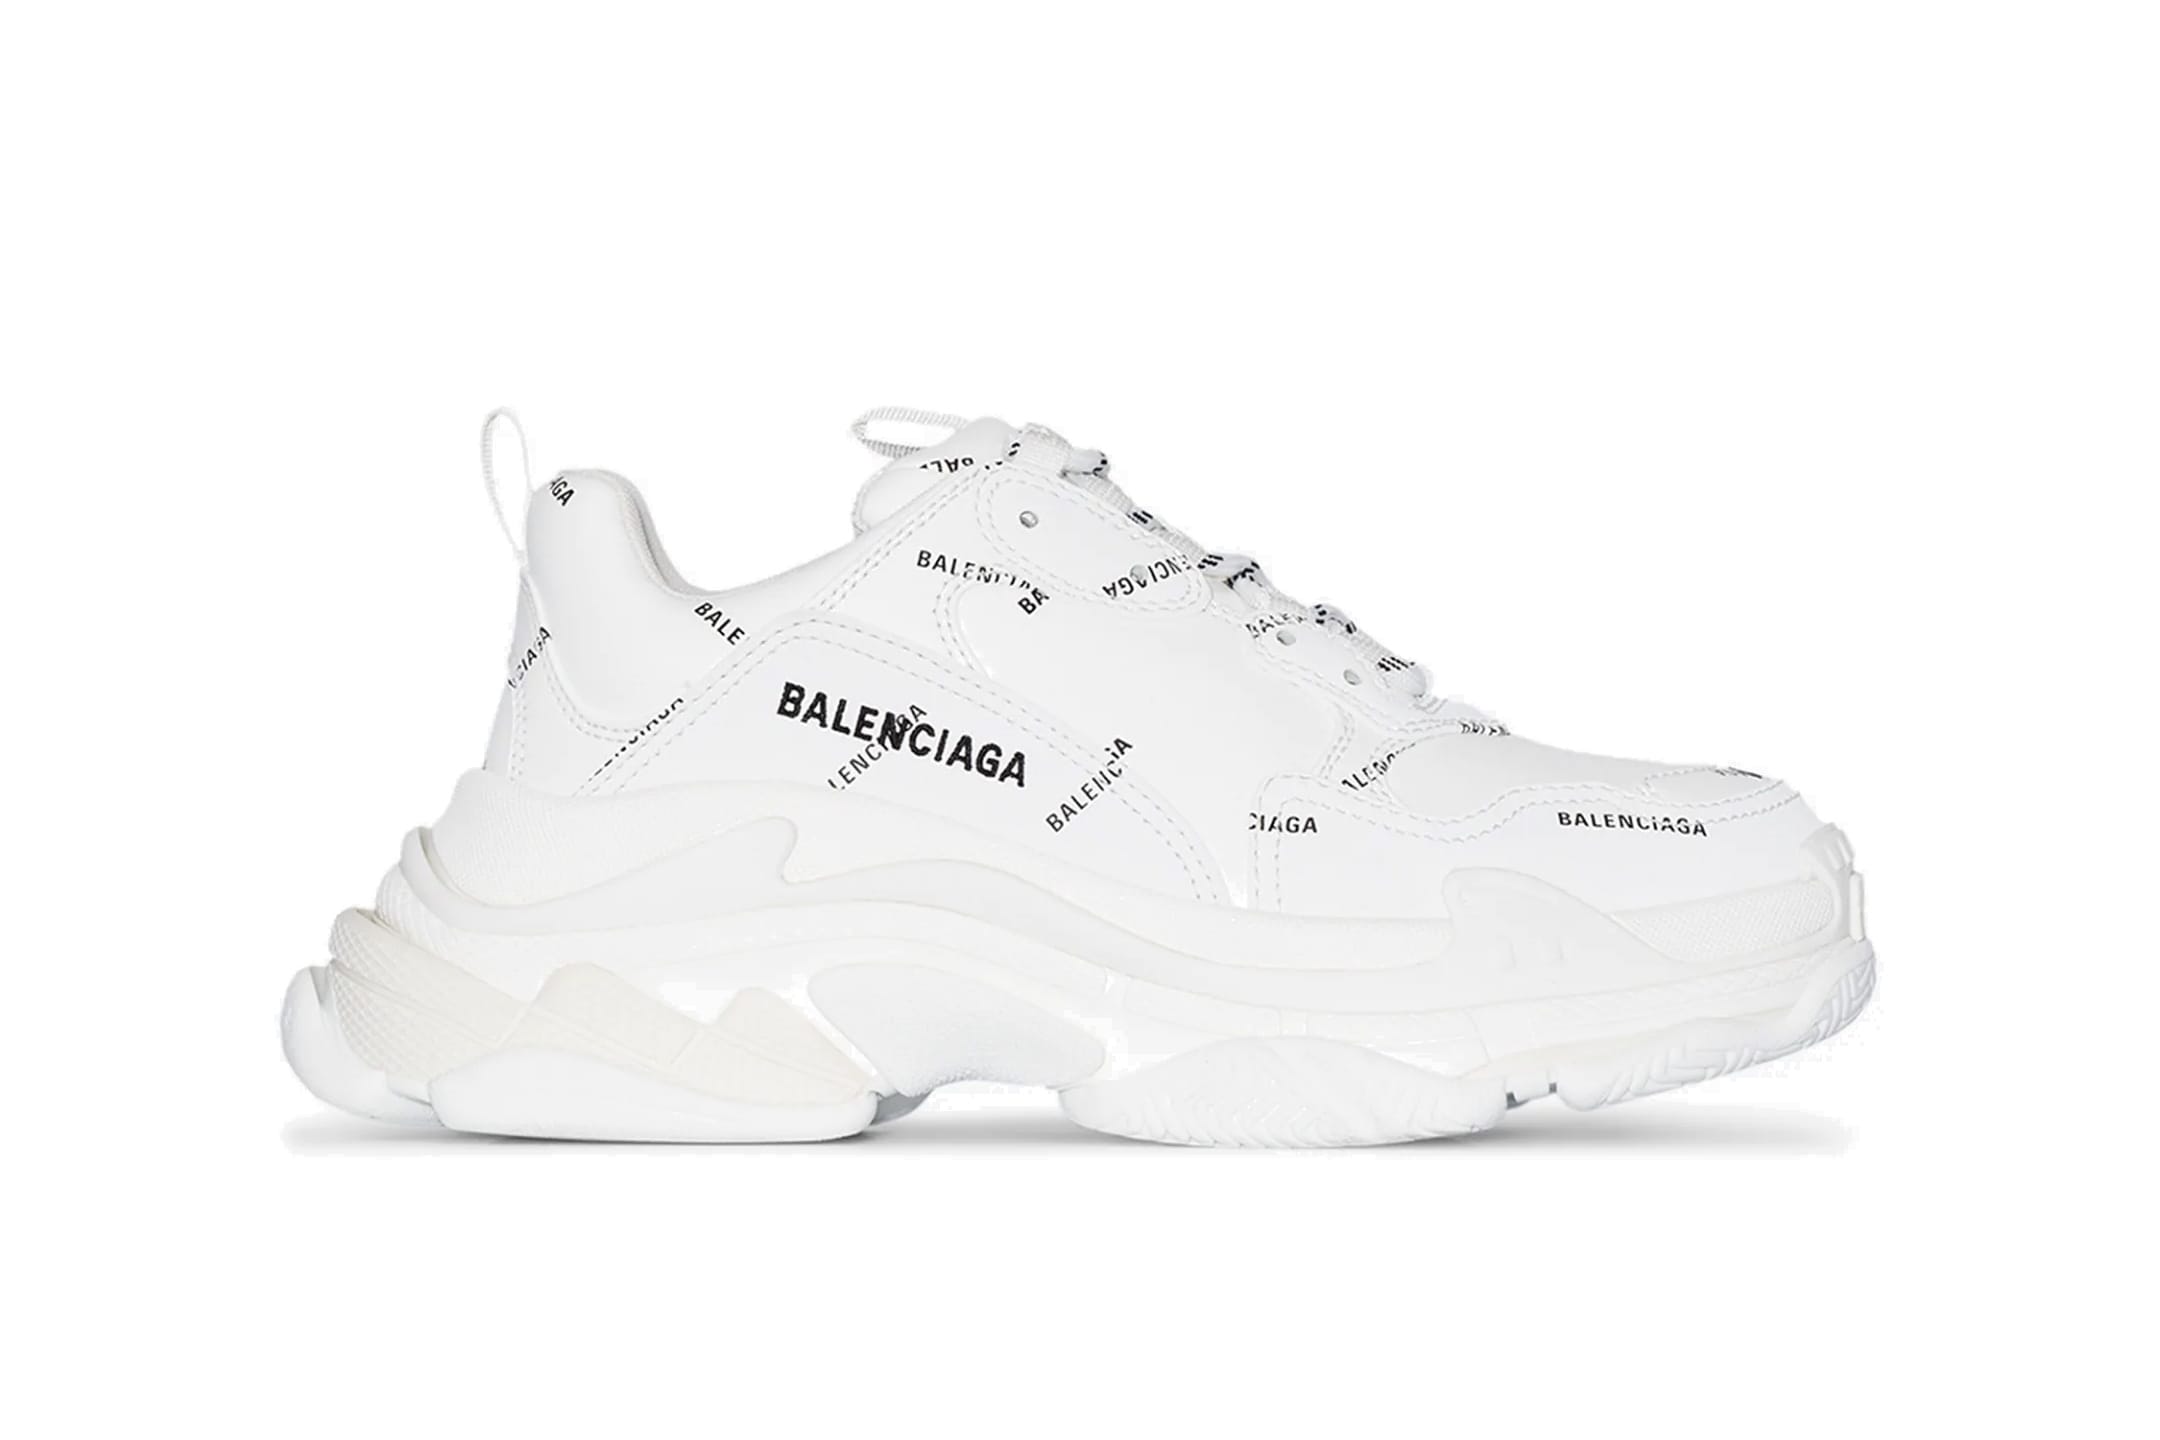 Balenciaga Leather Triple S Sneakers in Blue Grey Blue for